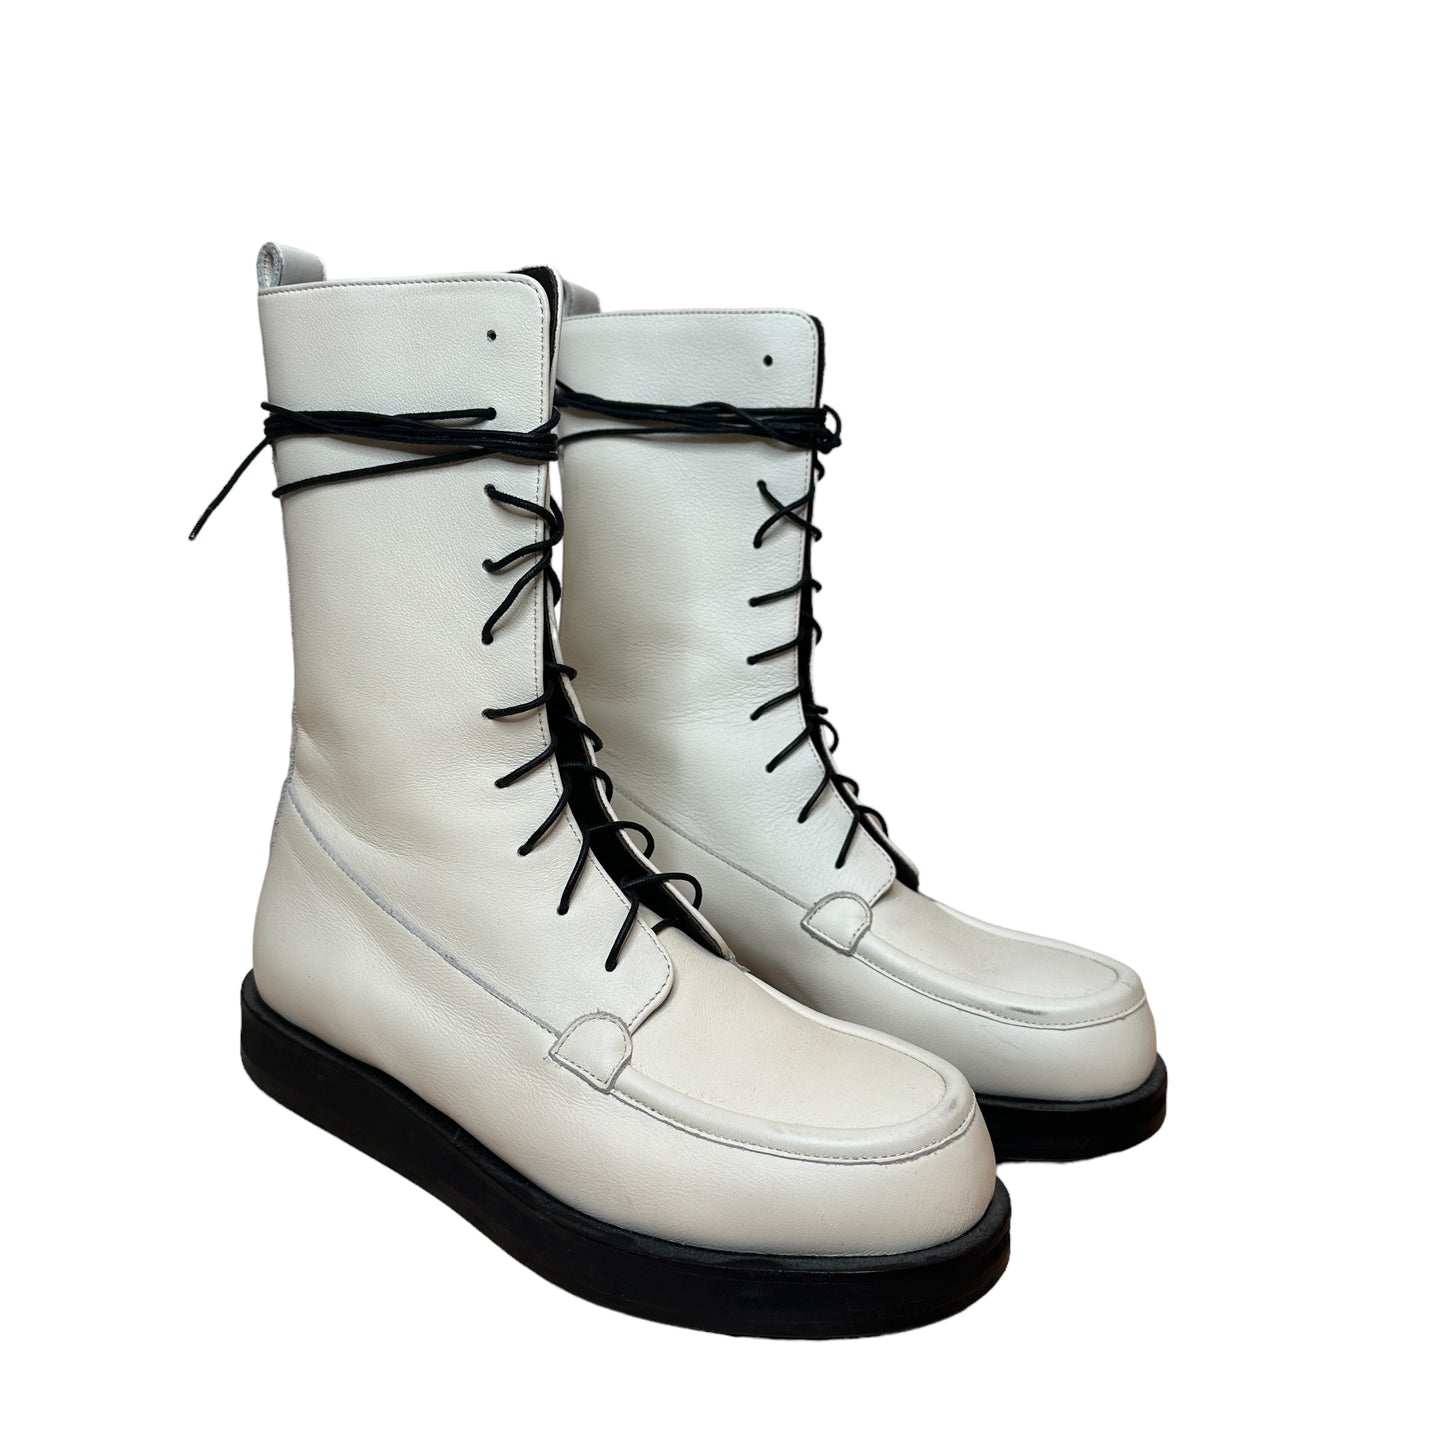 White Leather Boots - 9